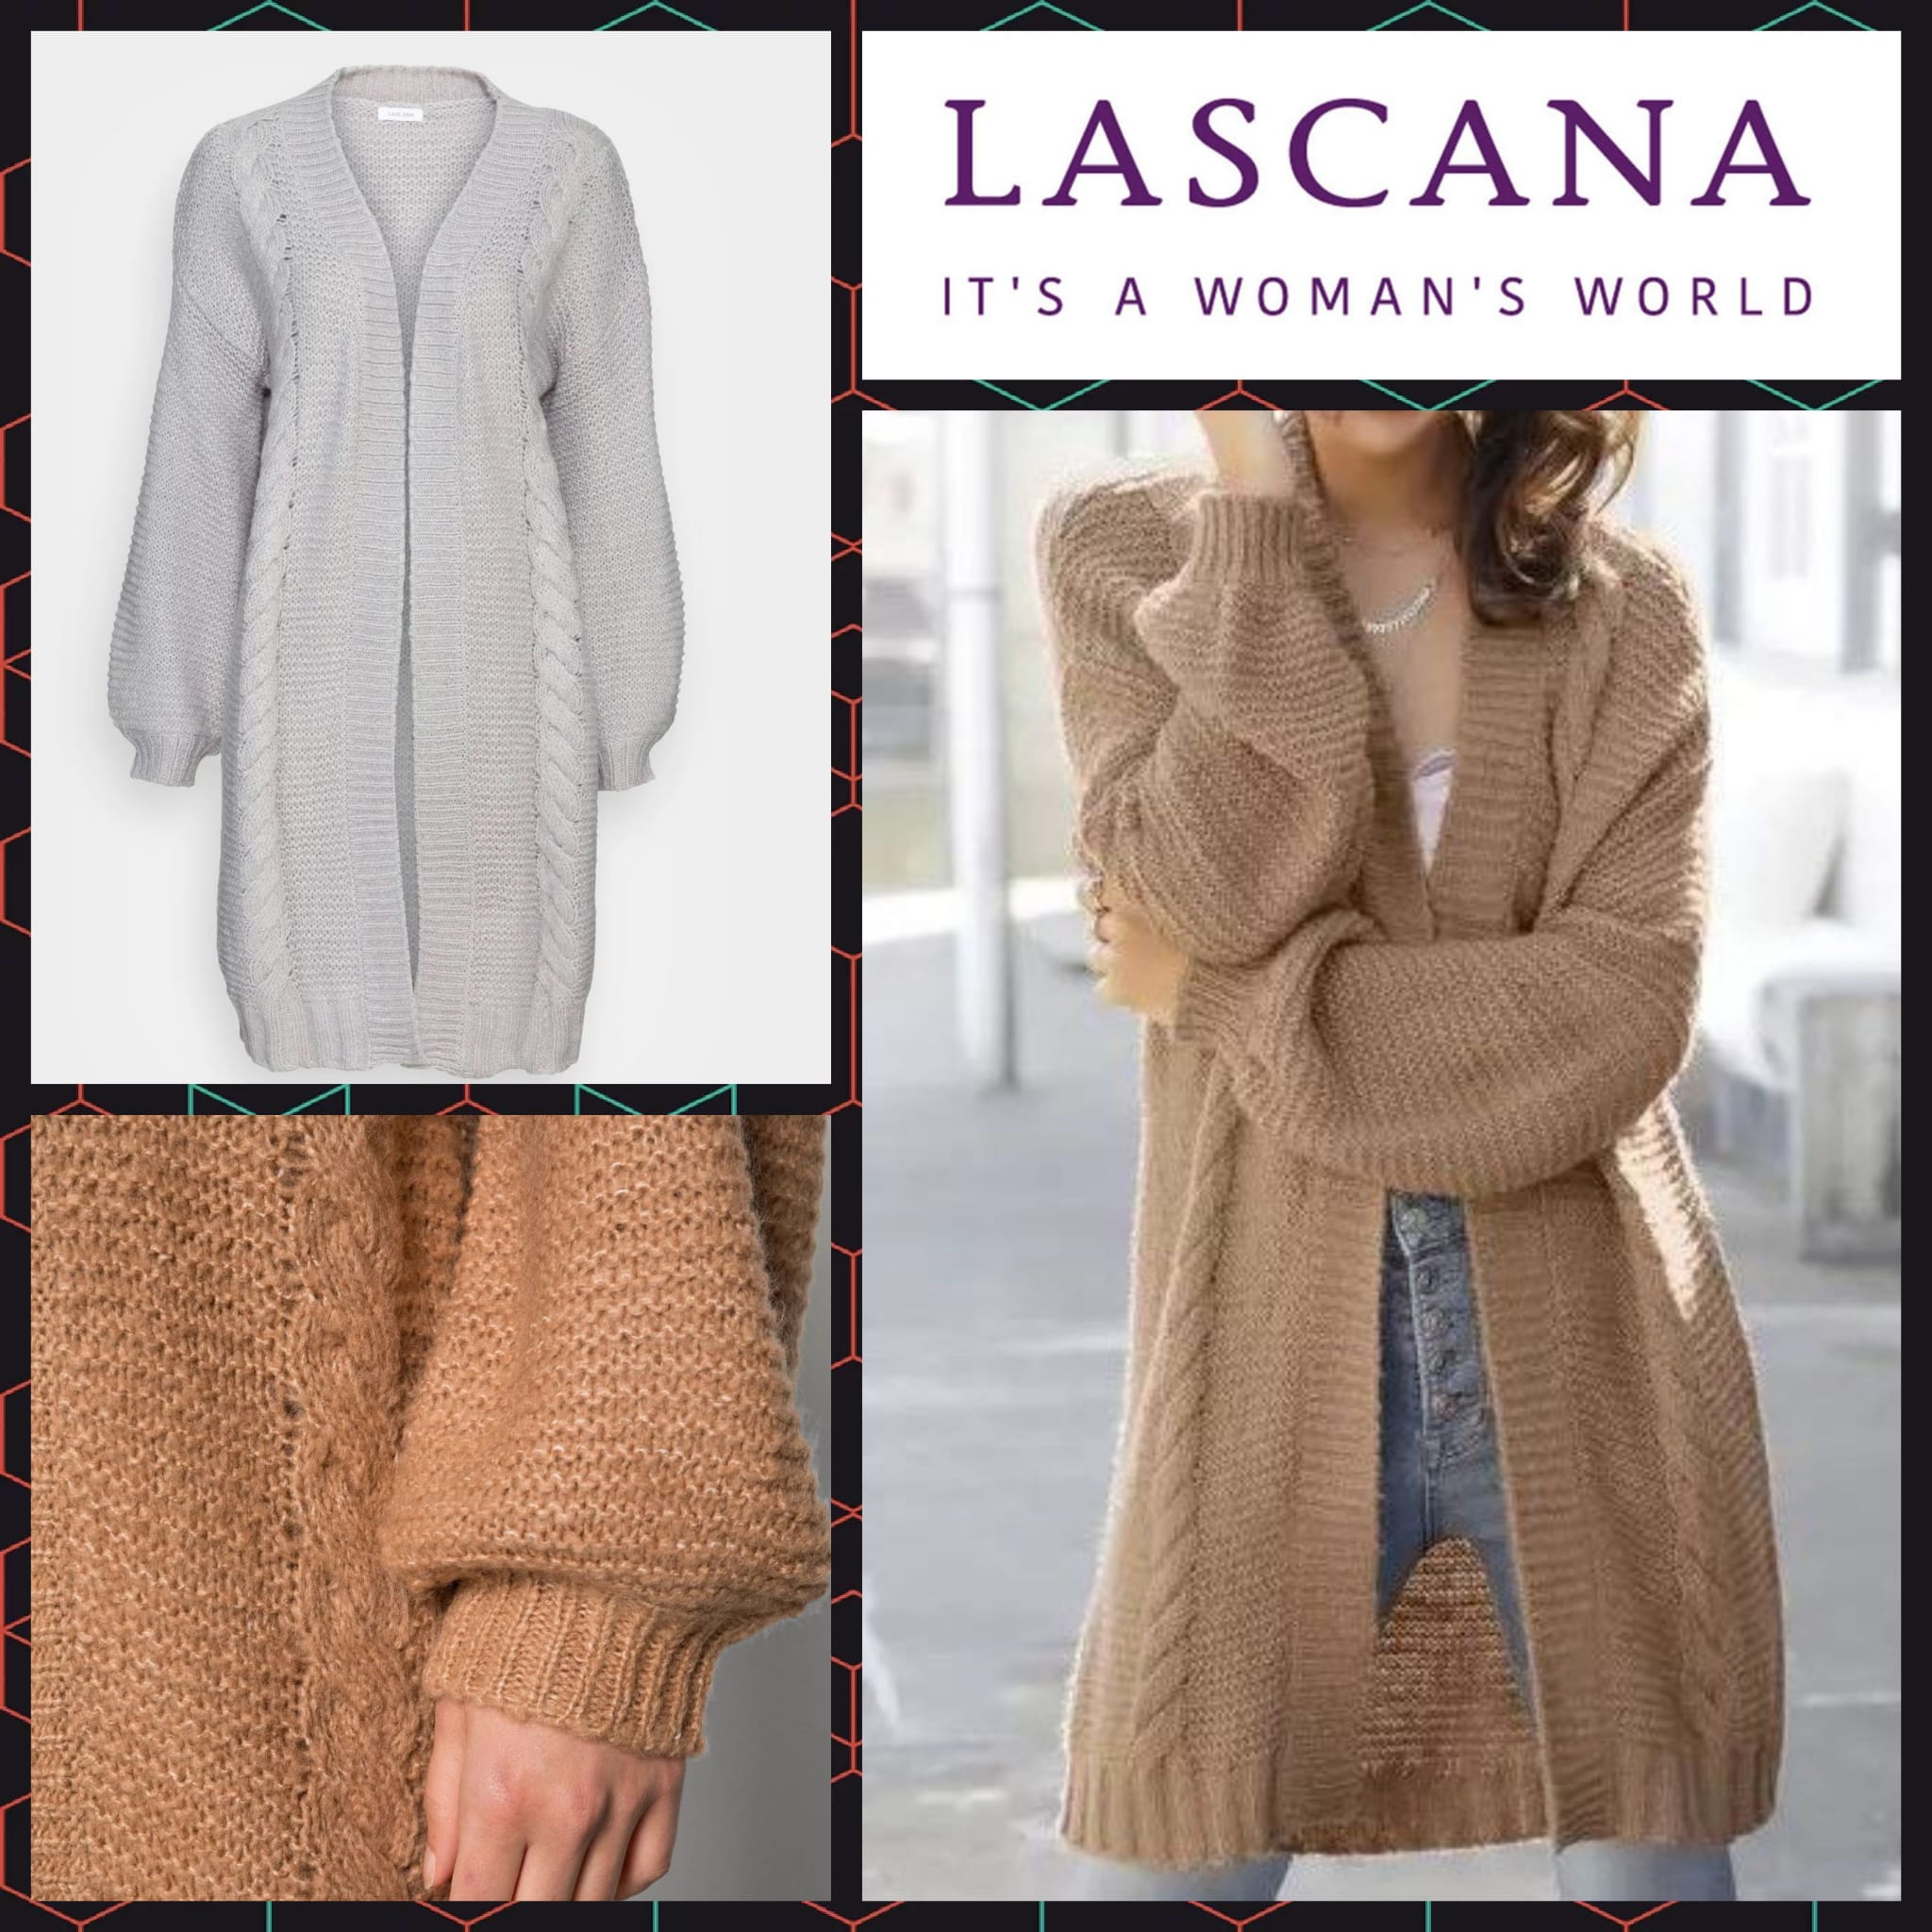 Women's cardigans from Lascana